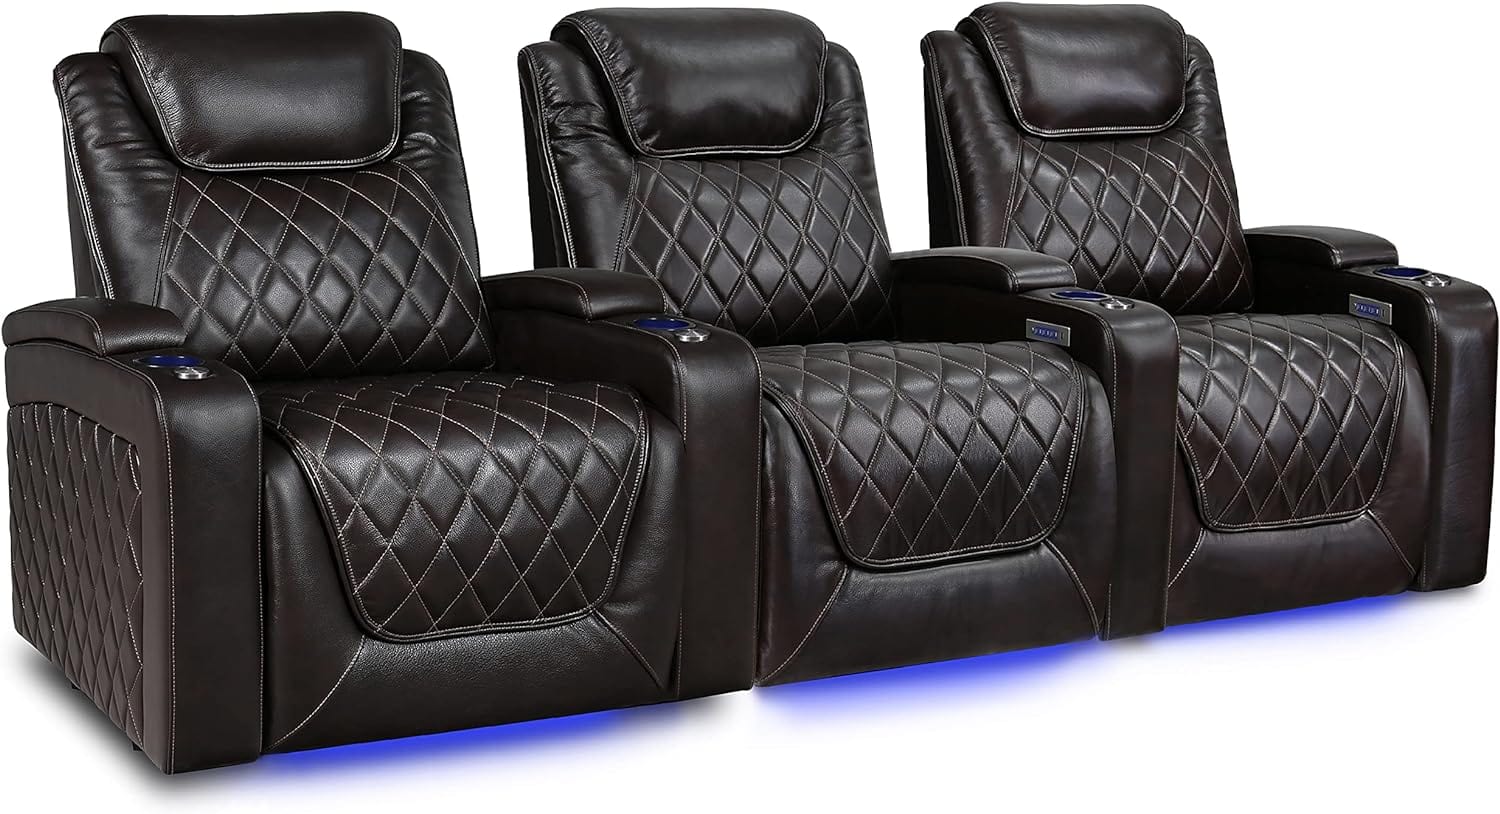 by Valencia Seating Sofa Row of 3 | Width: 104" Height: 45" Depth: 38" / Dark Chocolate / Regular Spec (300 LBs Sitting Weight Limit) Valencia Oslo XL Home Theater Seating